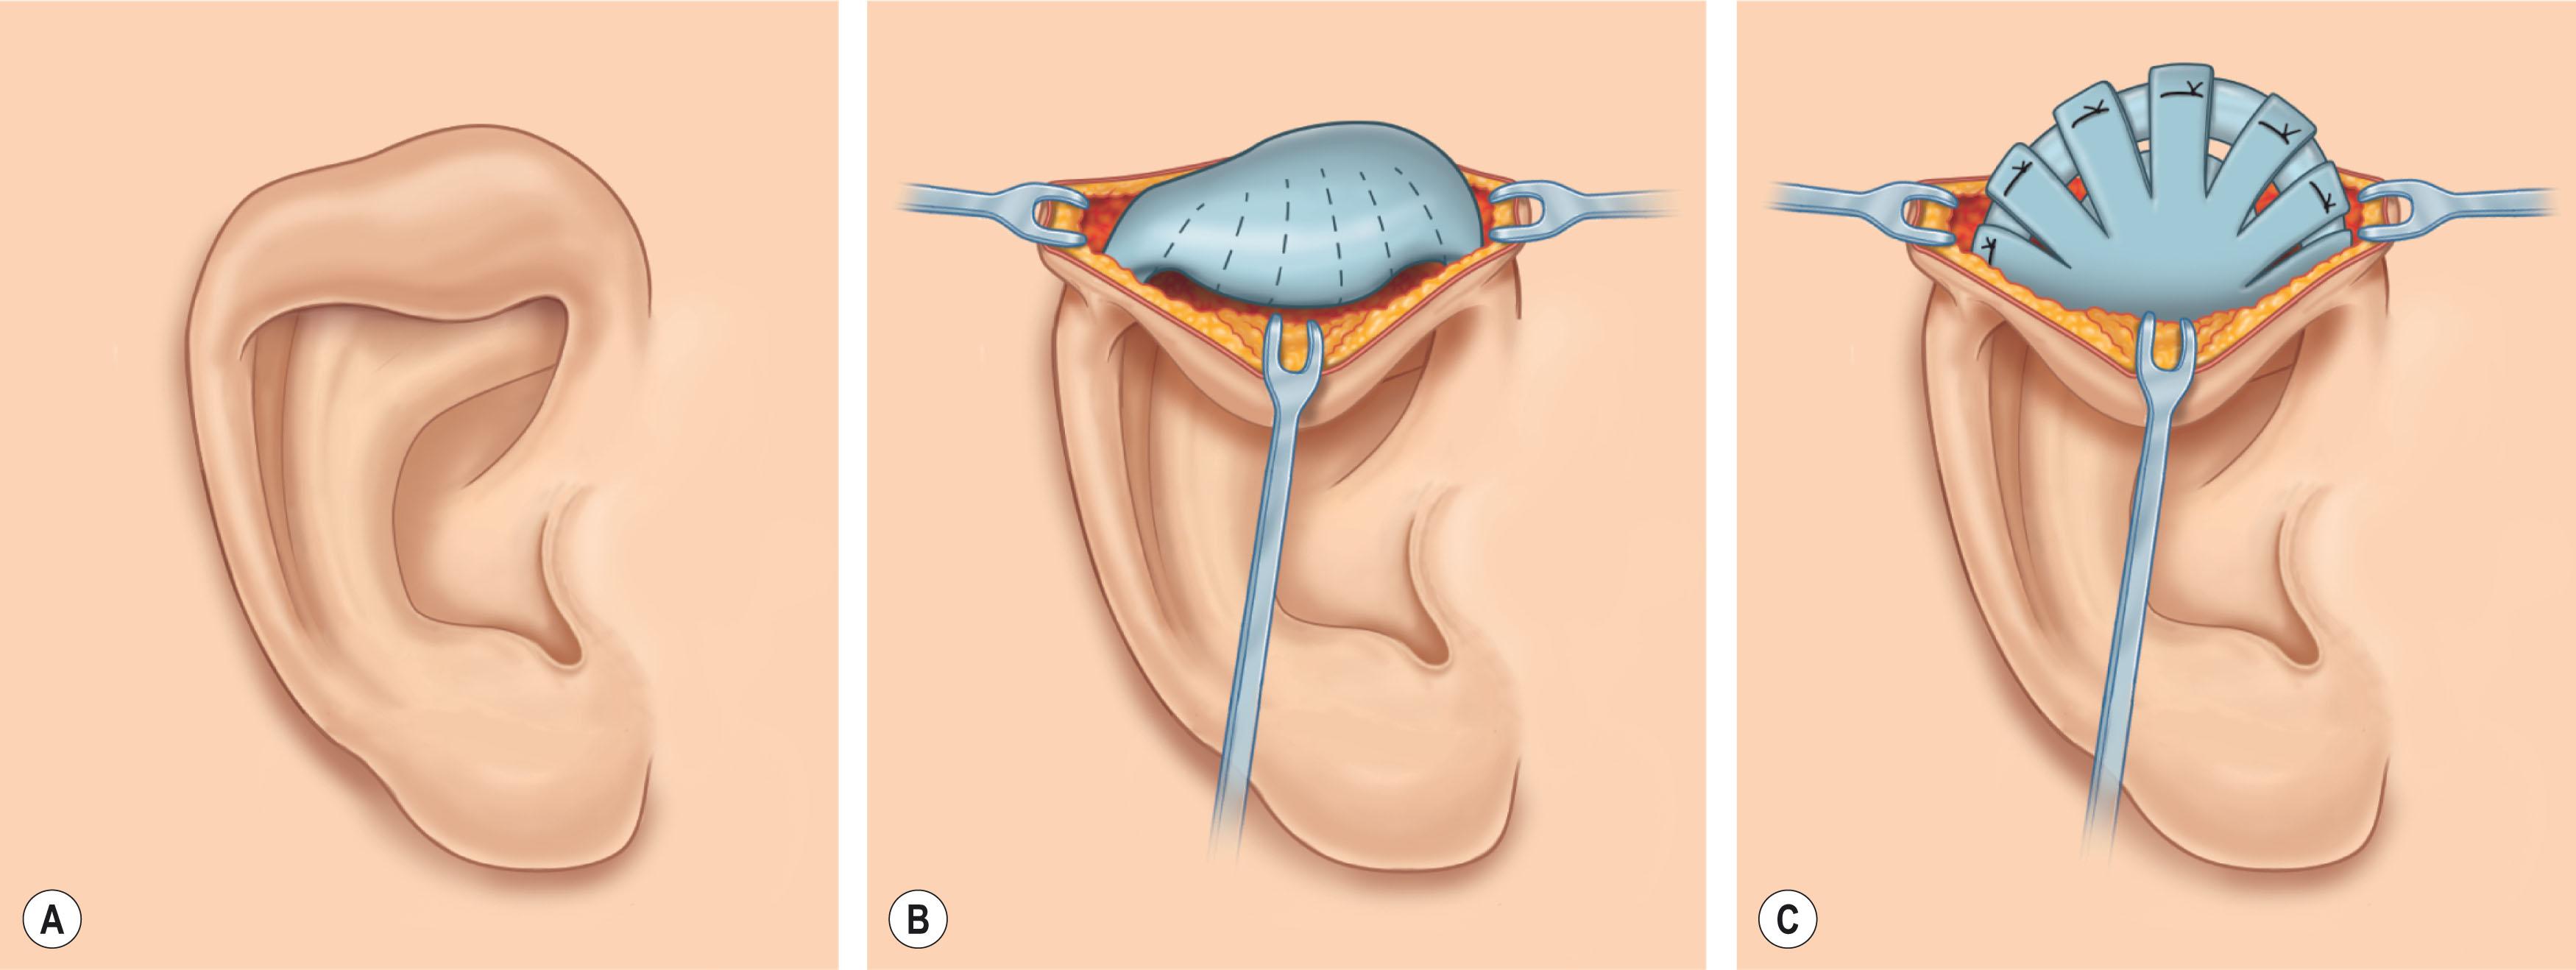 Figure 4.10, The Musgrave technique of correcting type IIA constricted ear. (A) Preoperative view of the deformity. (B) The folded cartilage is exposed through posterior incision. (C) Cartilage fingers are elevated and fixed to a strut of conchal cartilage.